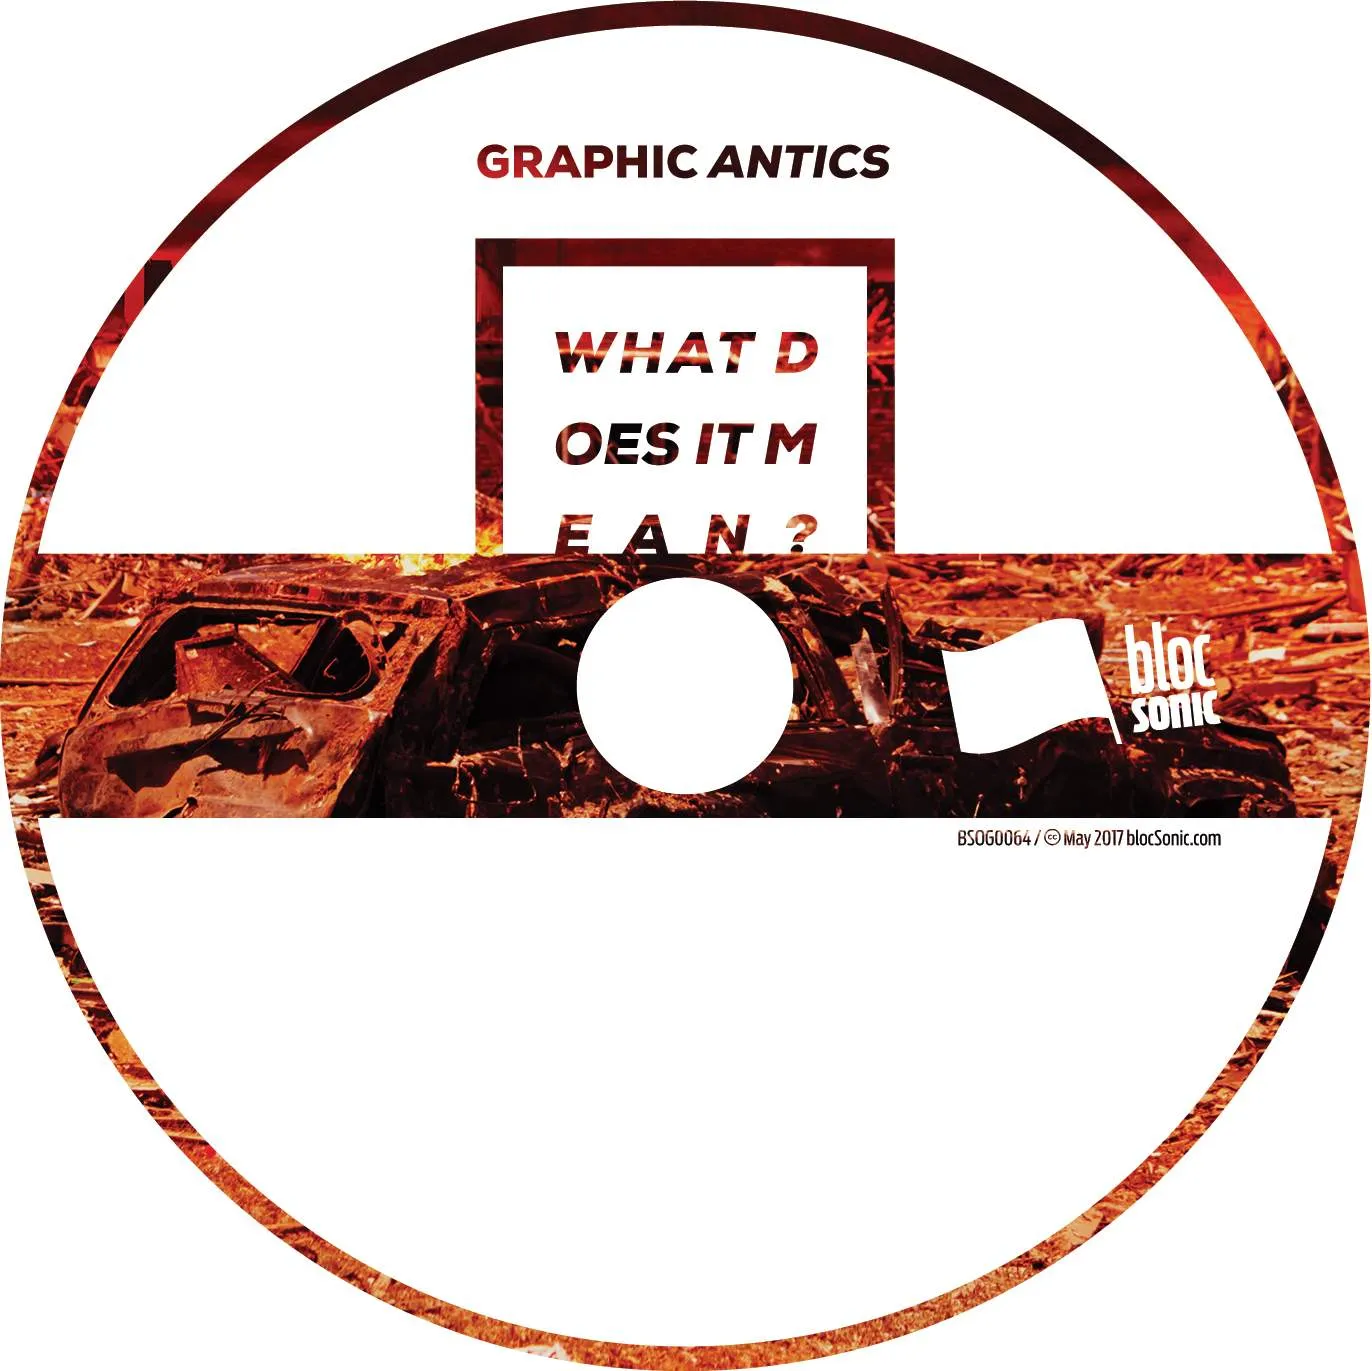 Album disc for “What Does It Mean?” by Graphic Antics